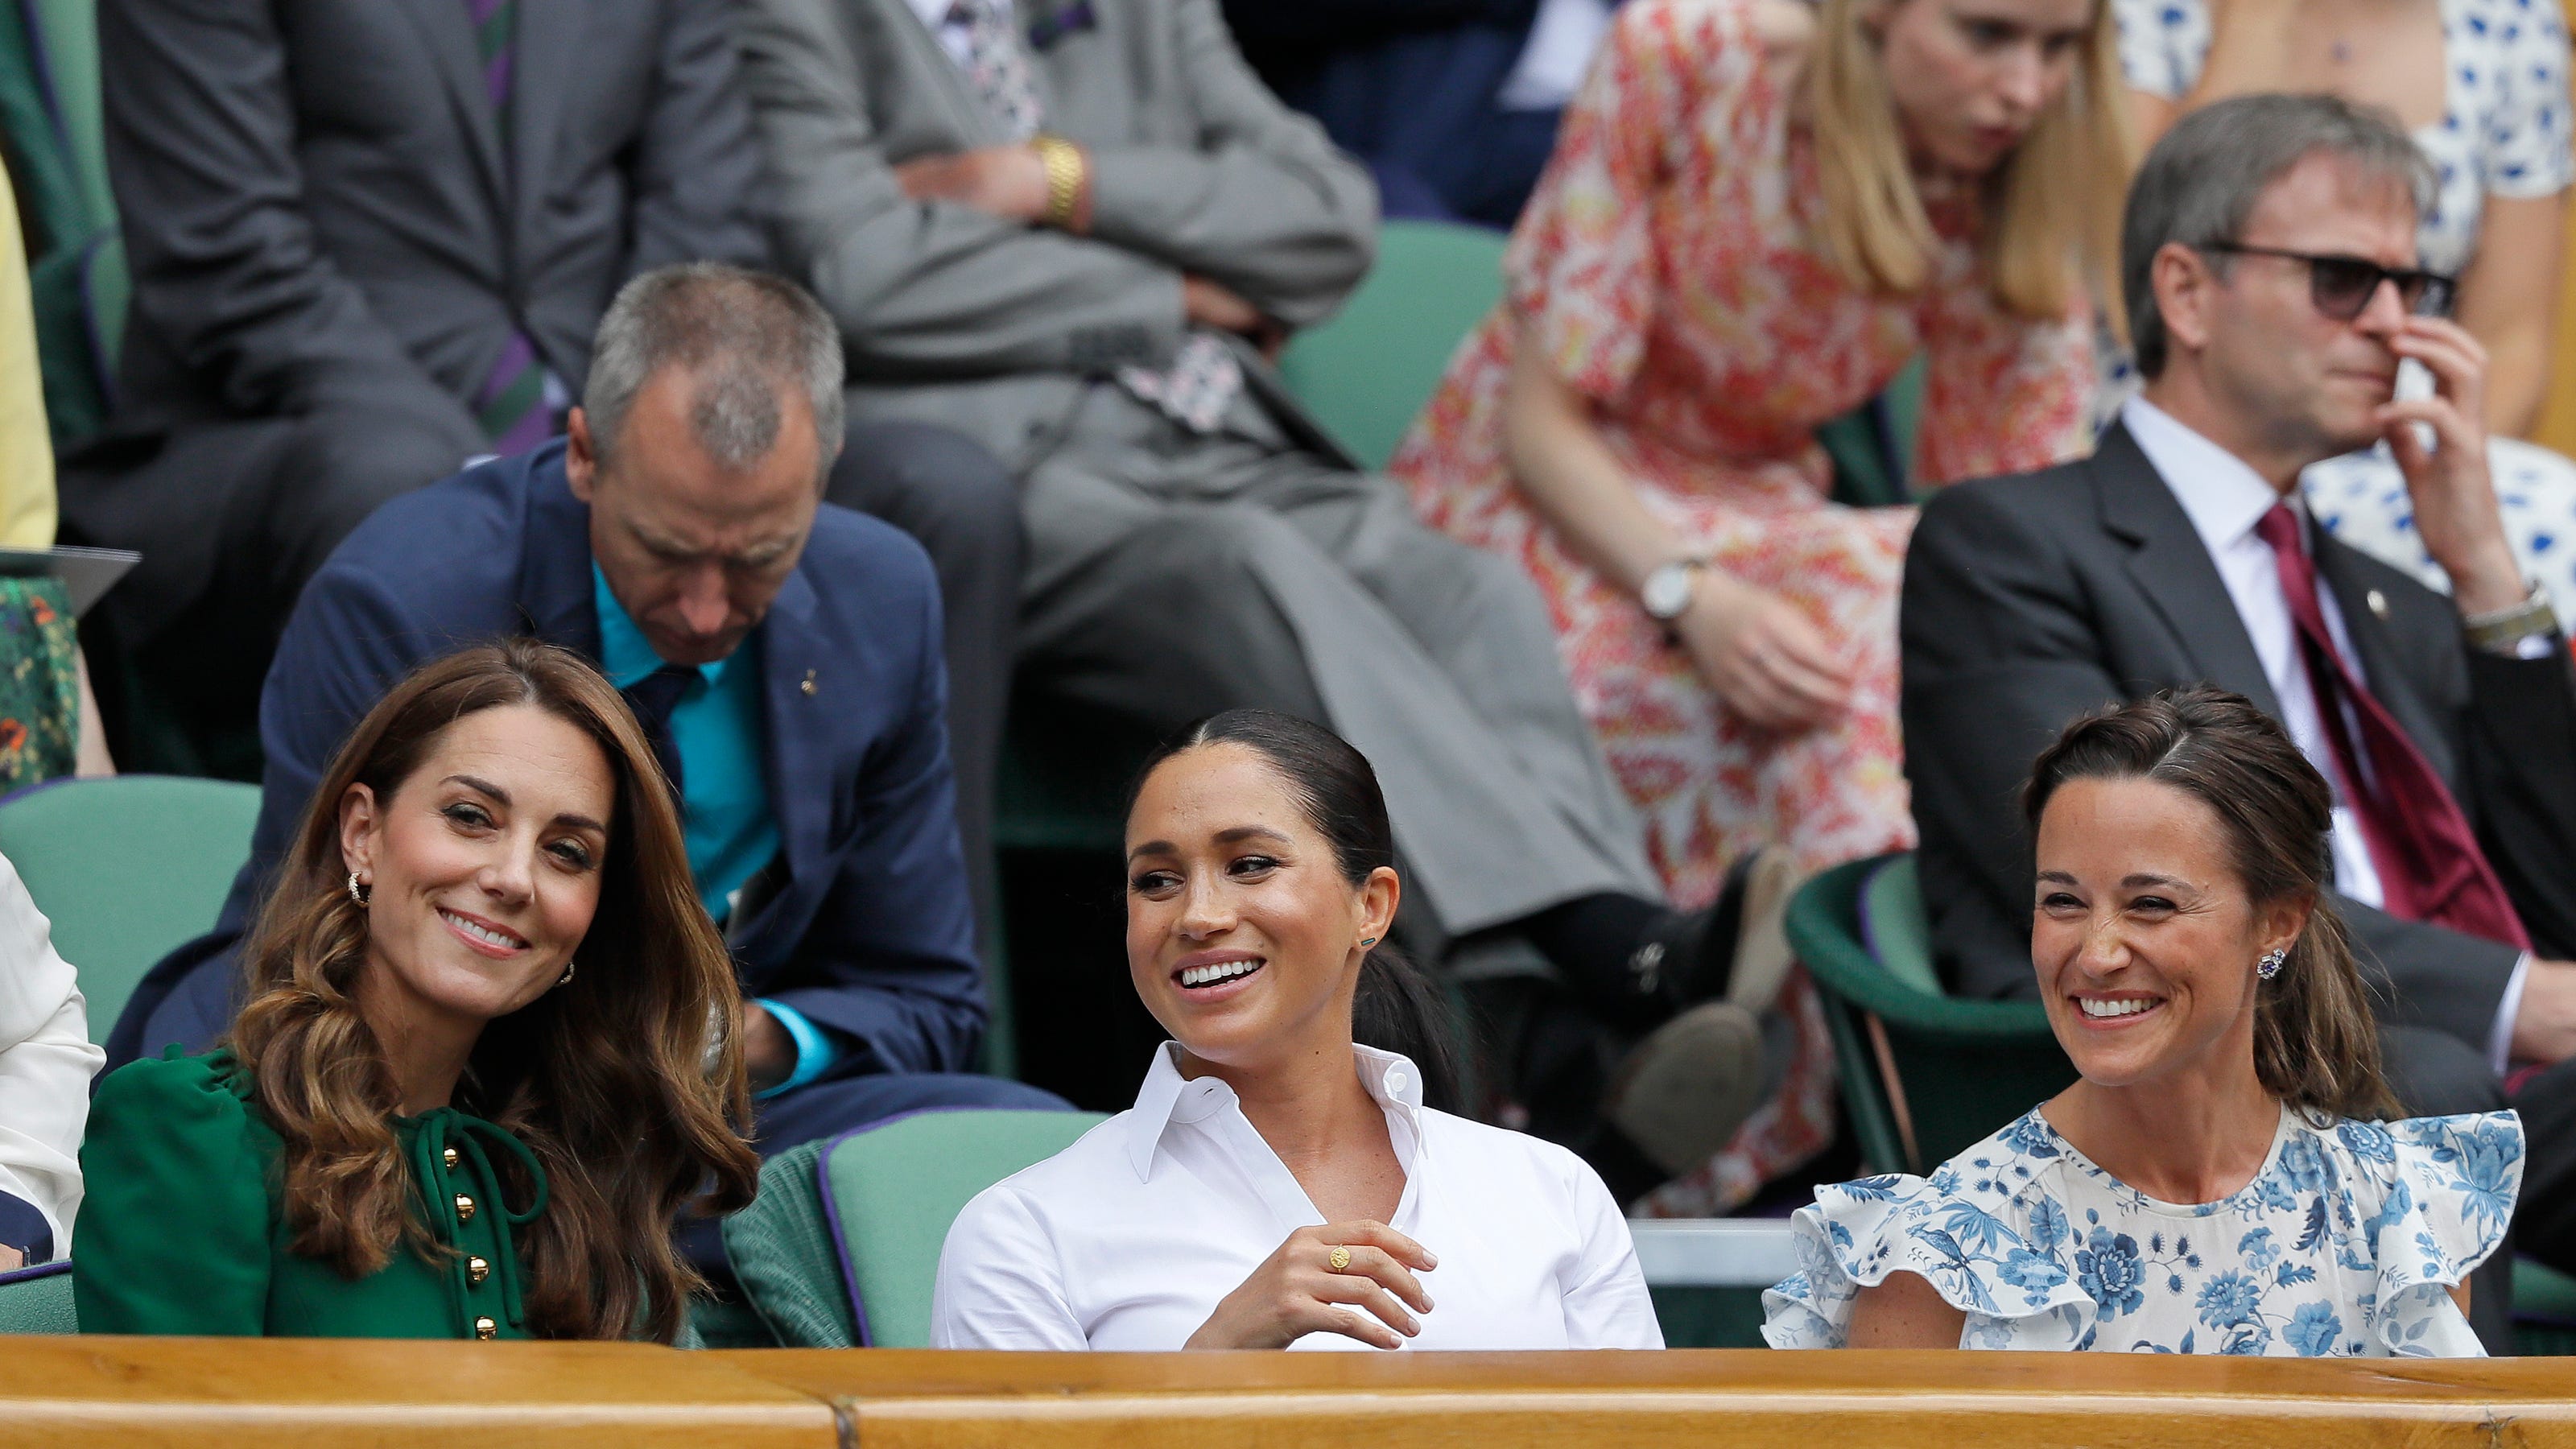 Wimbledon: Duchess Kate and Pippa Middleton attend together